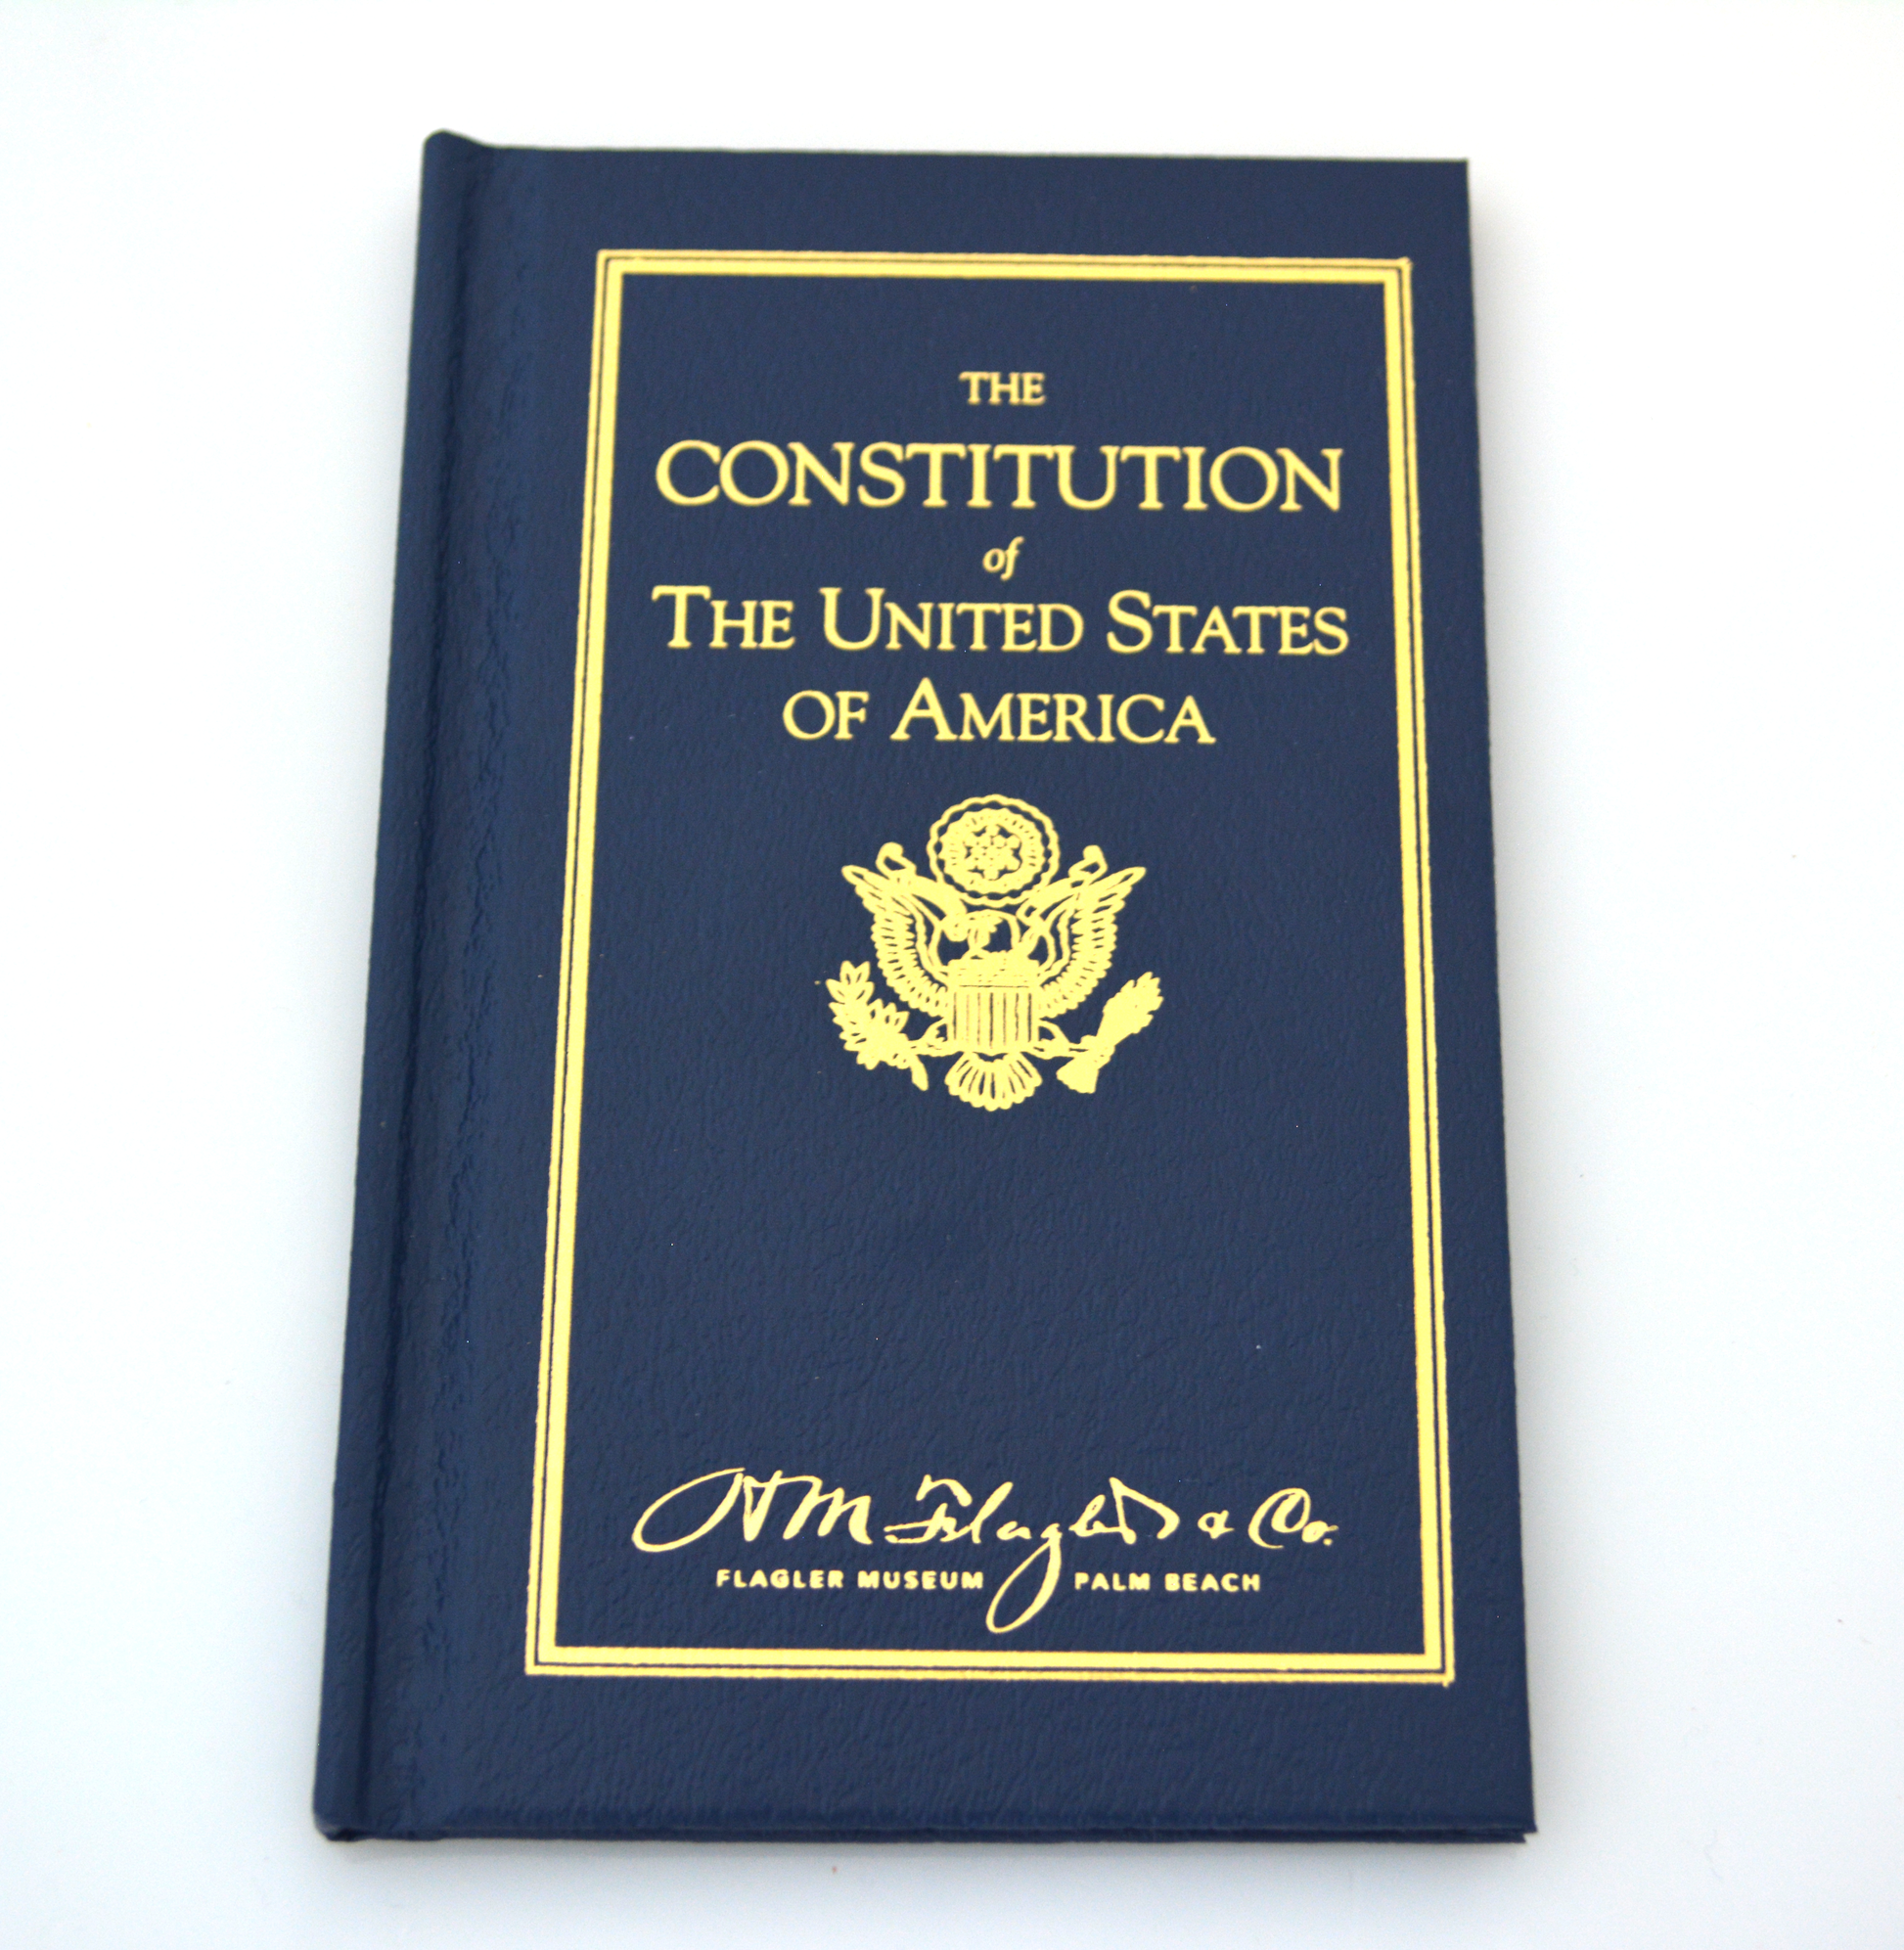 The Constitution of the United States of America – H.M. Flagler & Co